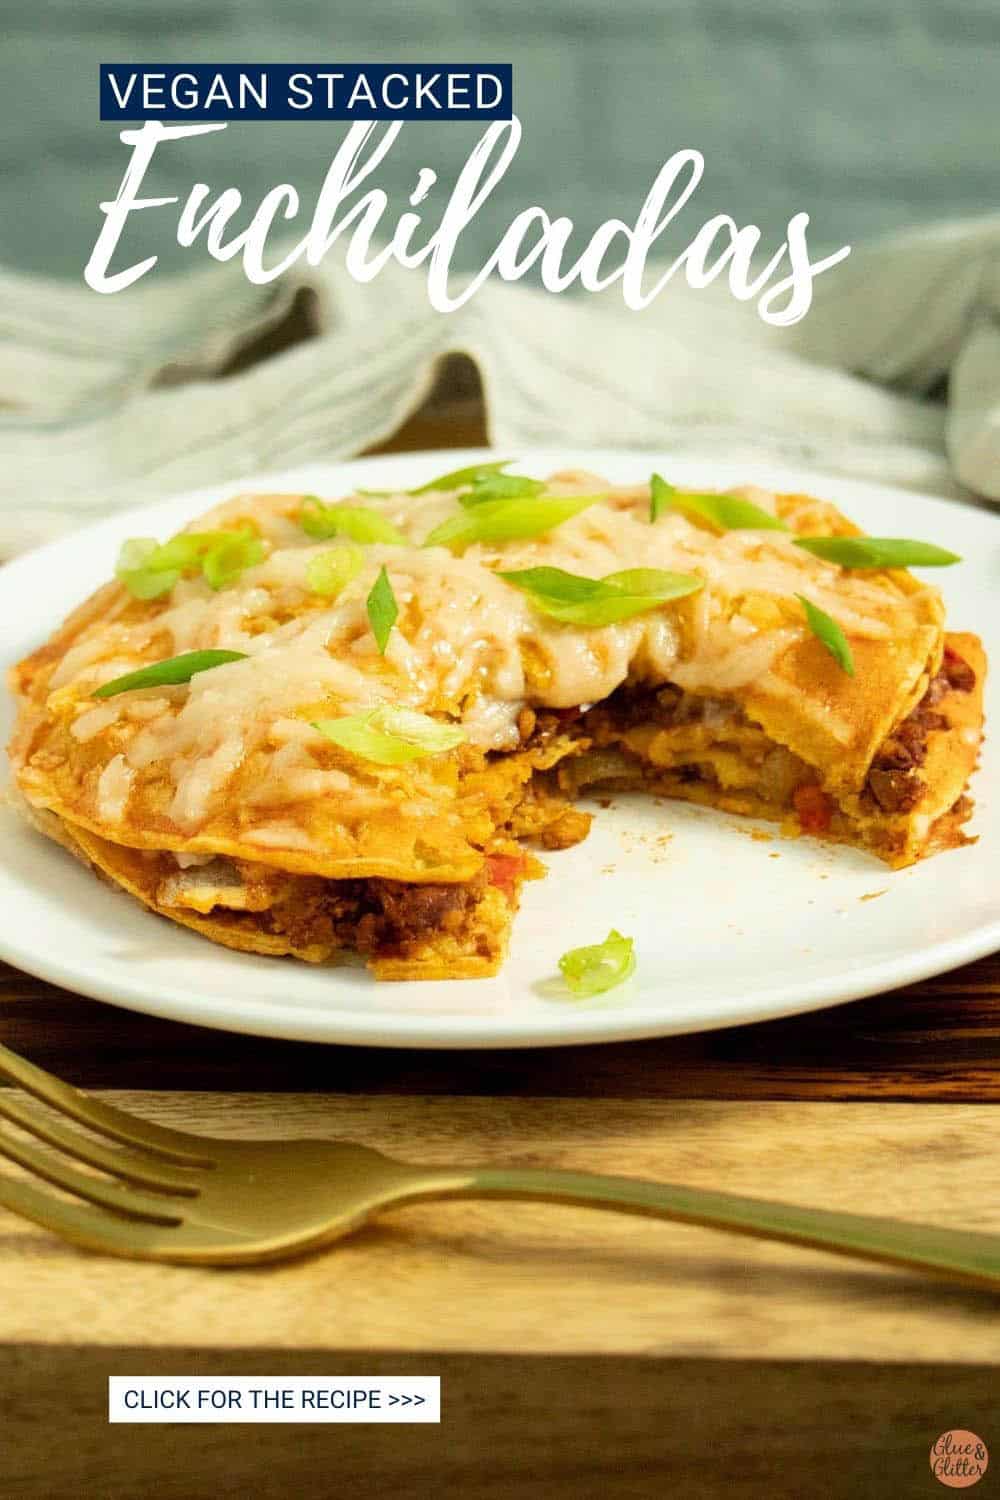 vegan stacked enchiladas on a white plate with a bite taken out, so you can see the layers inside, text overlay